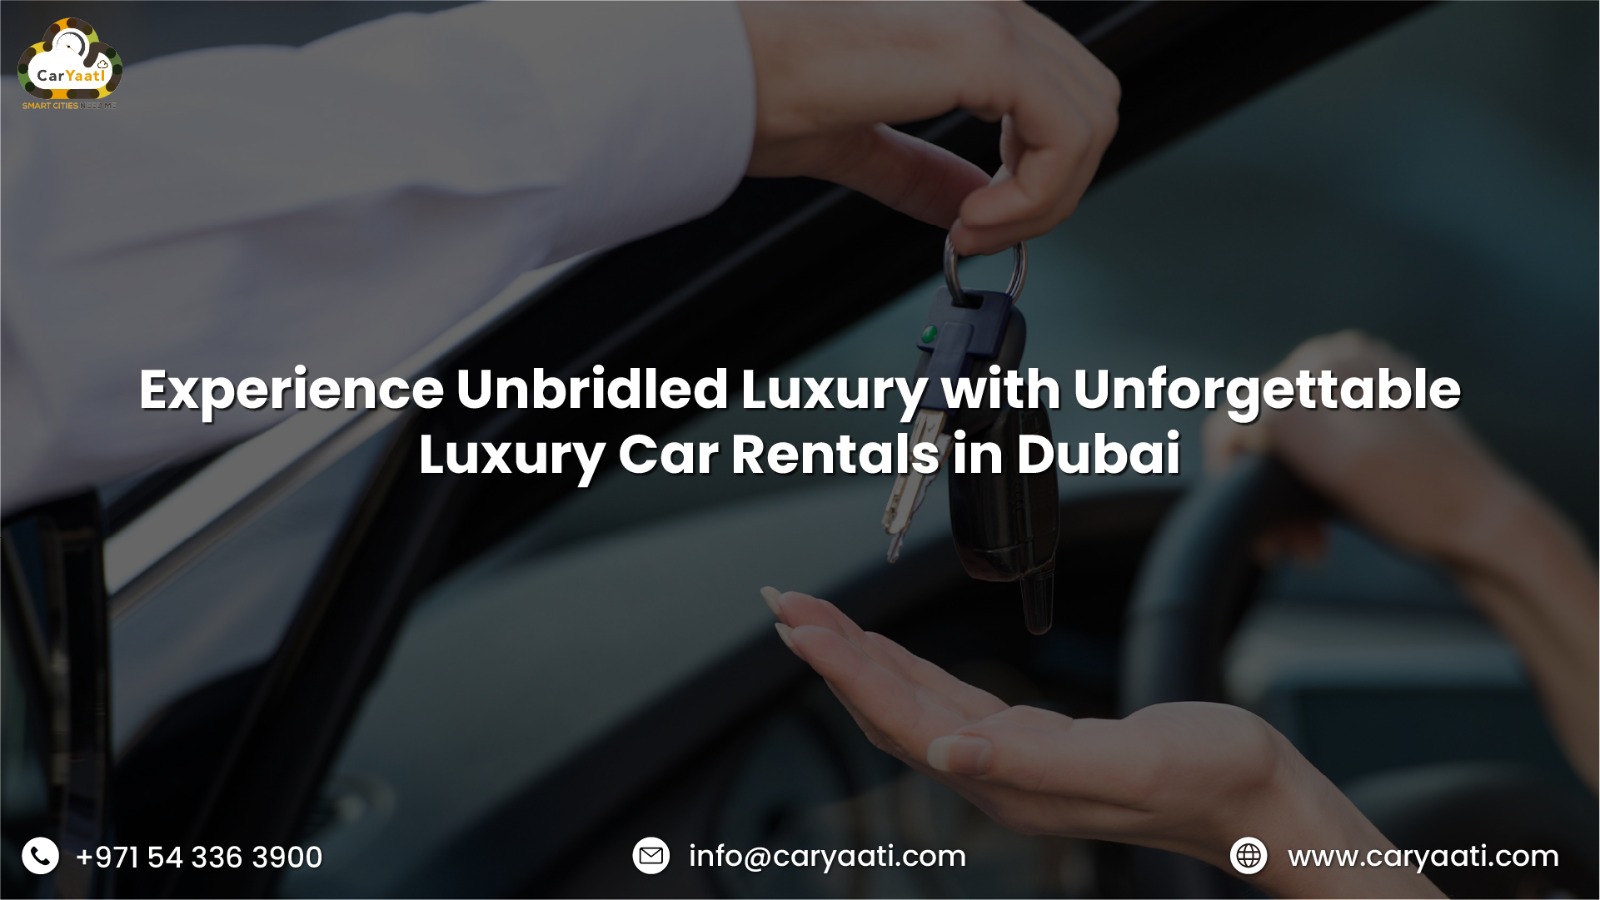 Experience Unbridled Luxury with Unforgettable Luxury Car Rentals in Dubai